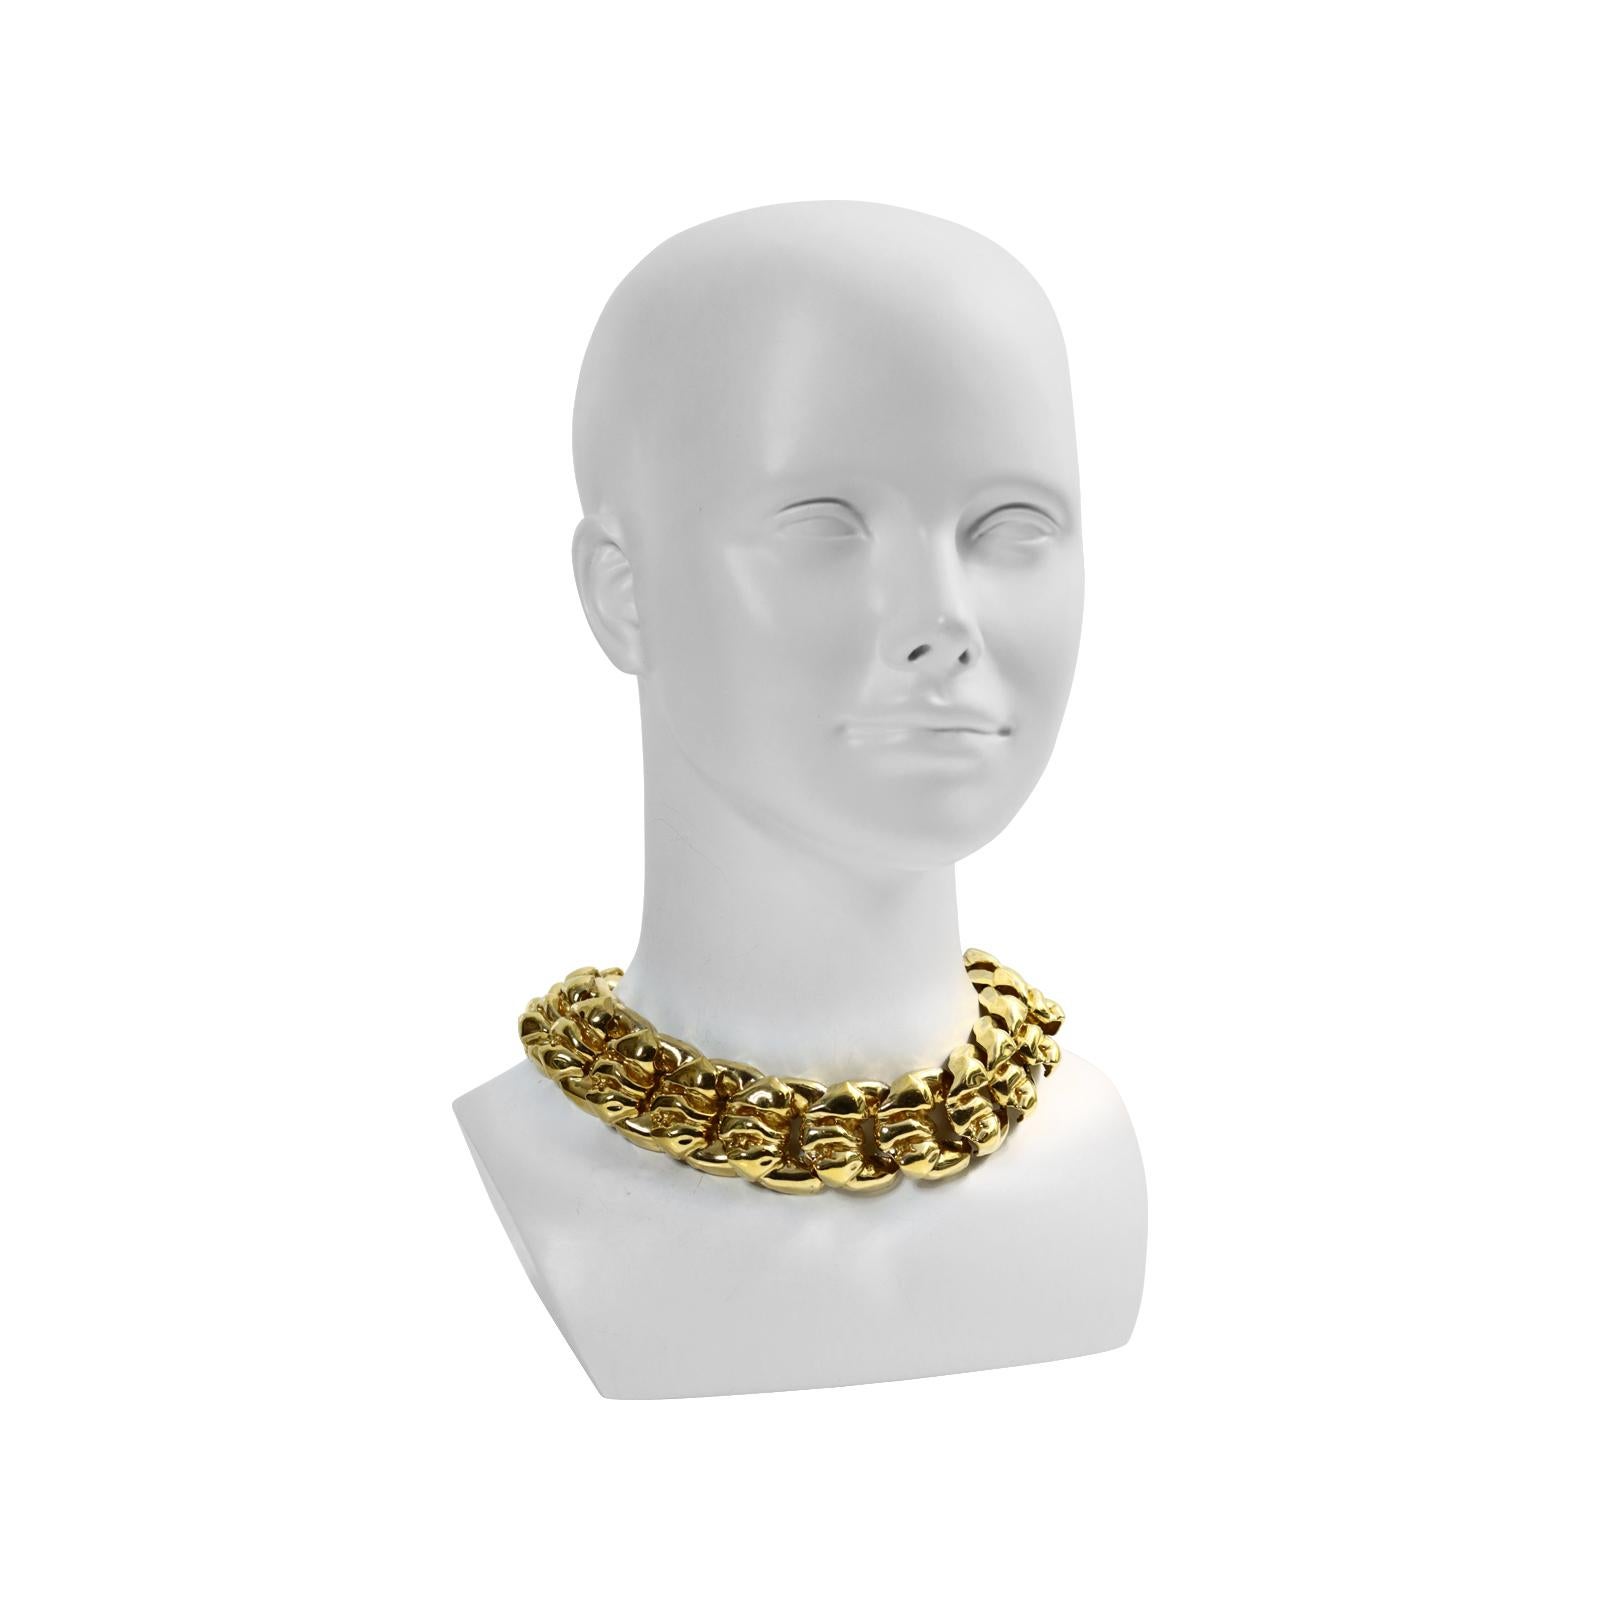 Vintage Ciner Chunky Linking Pieces Choker Necklace Circa 1980's.  One of the 1980s Classic Necklaces that stand out with the look. Part of the Link is smooth and the other part is elevated and makes the pattern.  Ciner is now out of business so